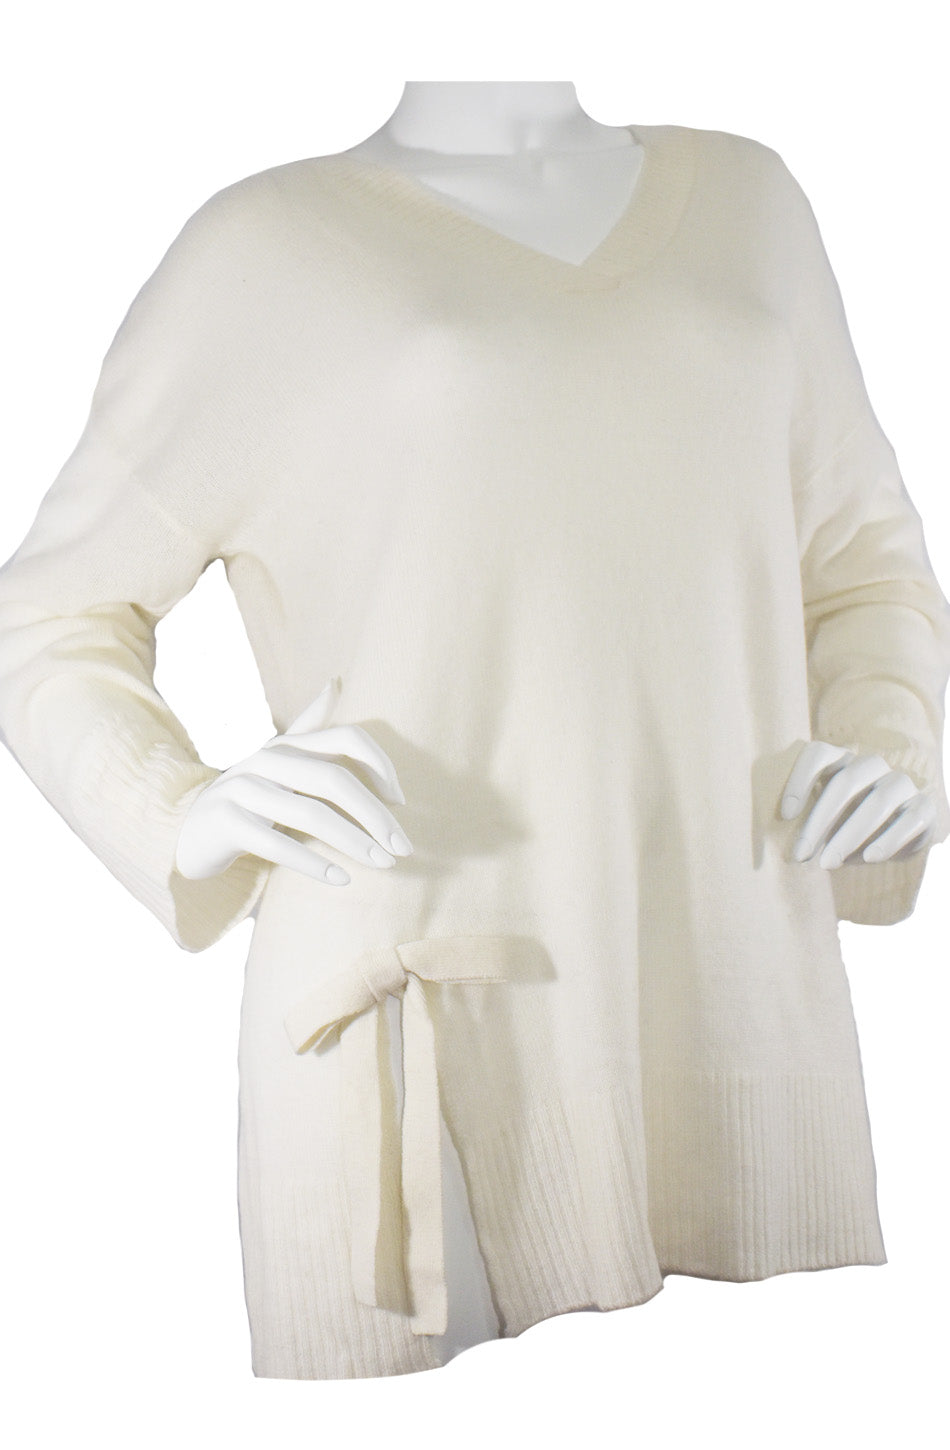 In Cashmere Bow Detail Cashmere Sweater- Size L